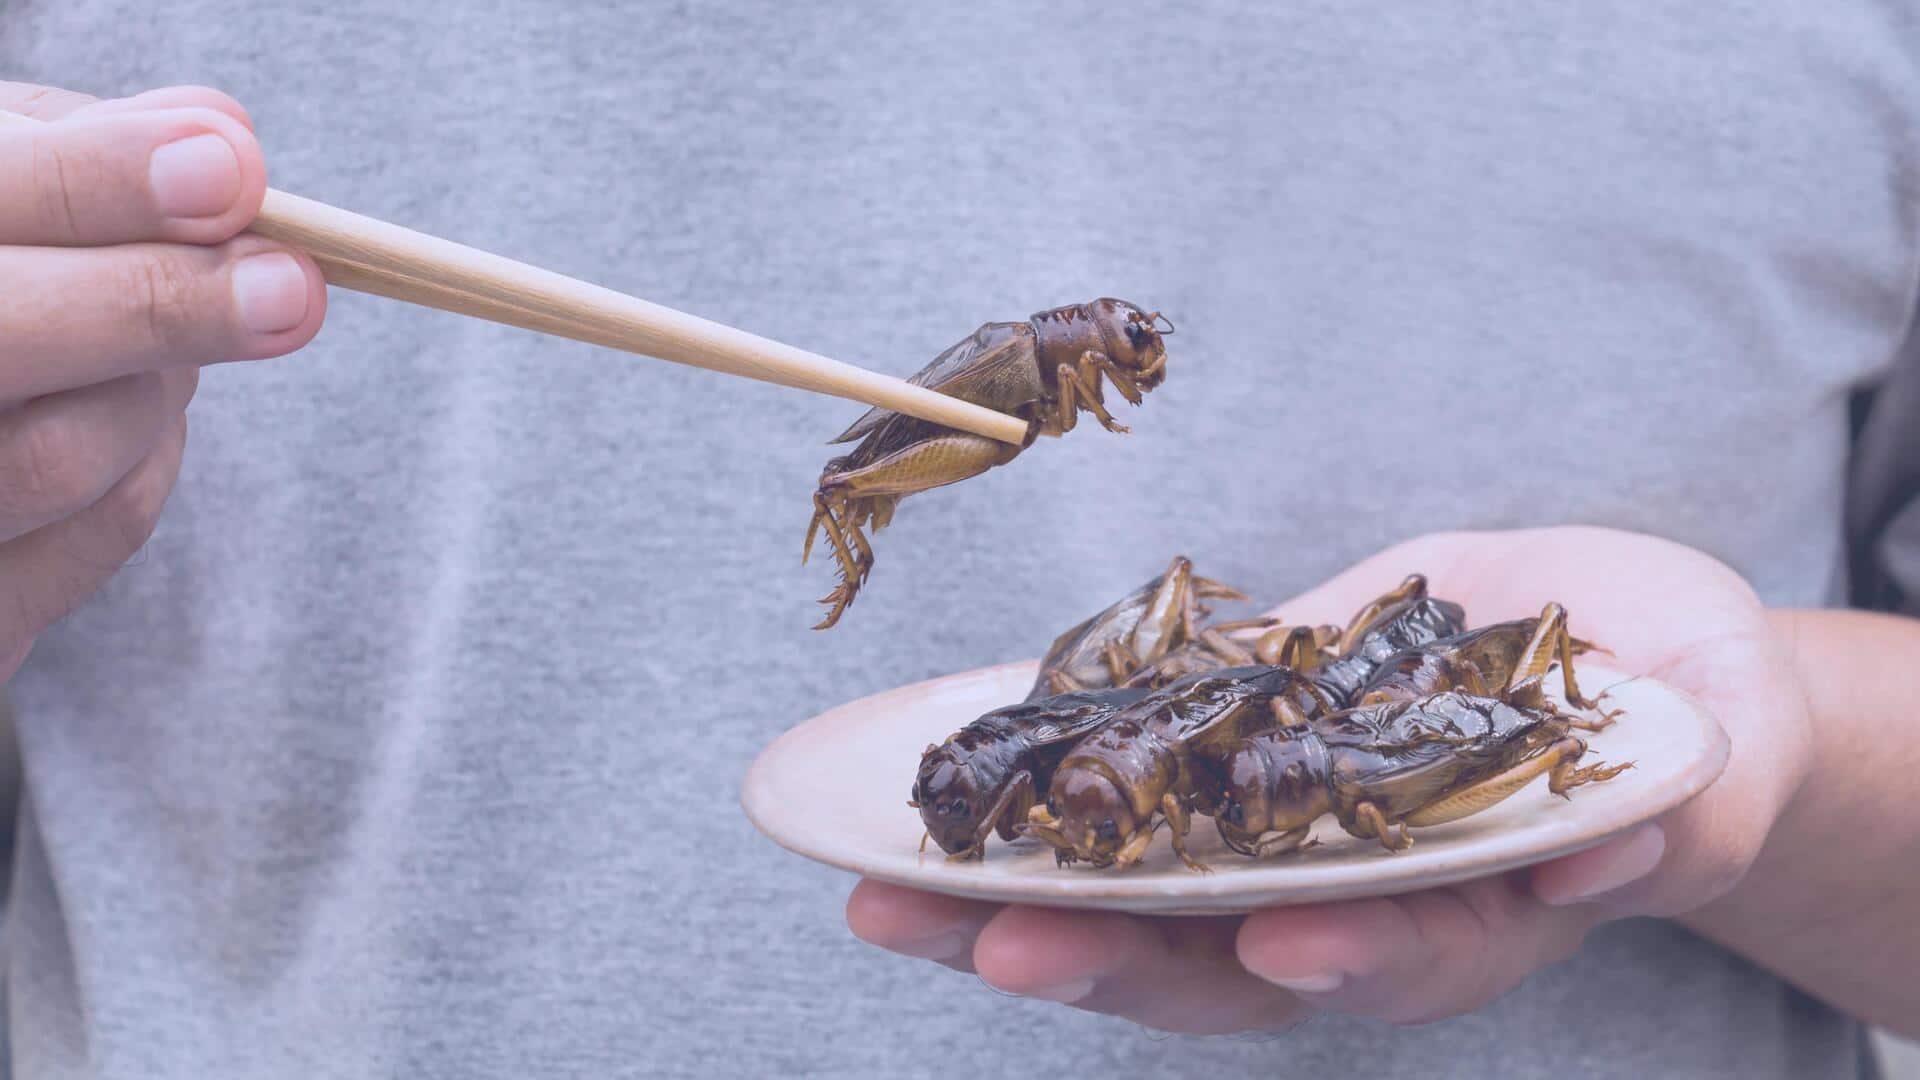 How eating insects could help save the planet